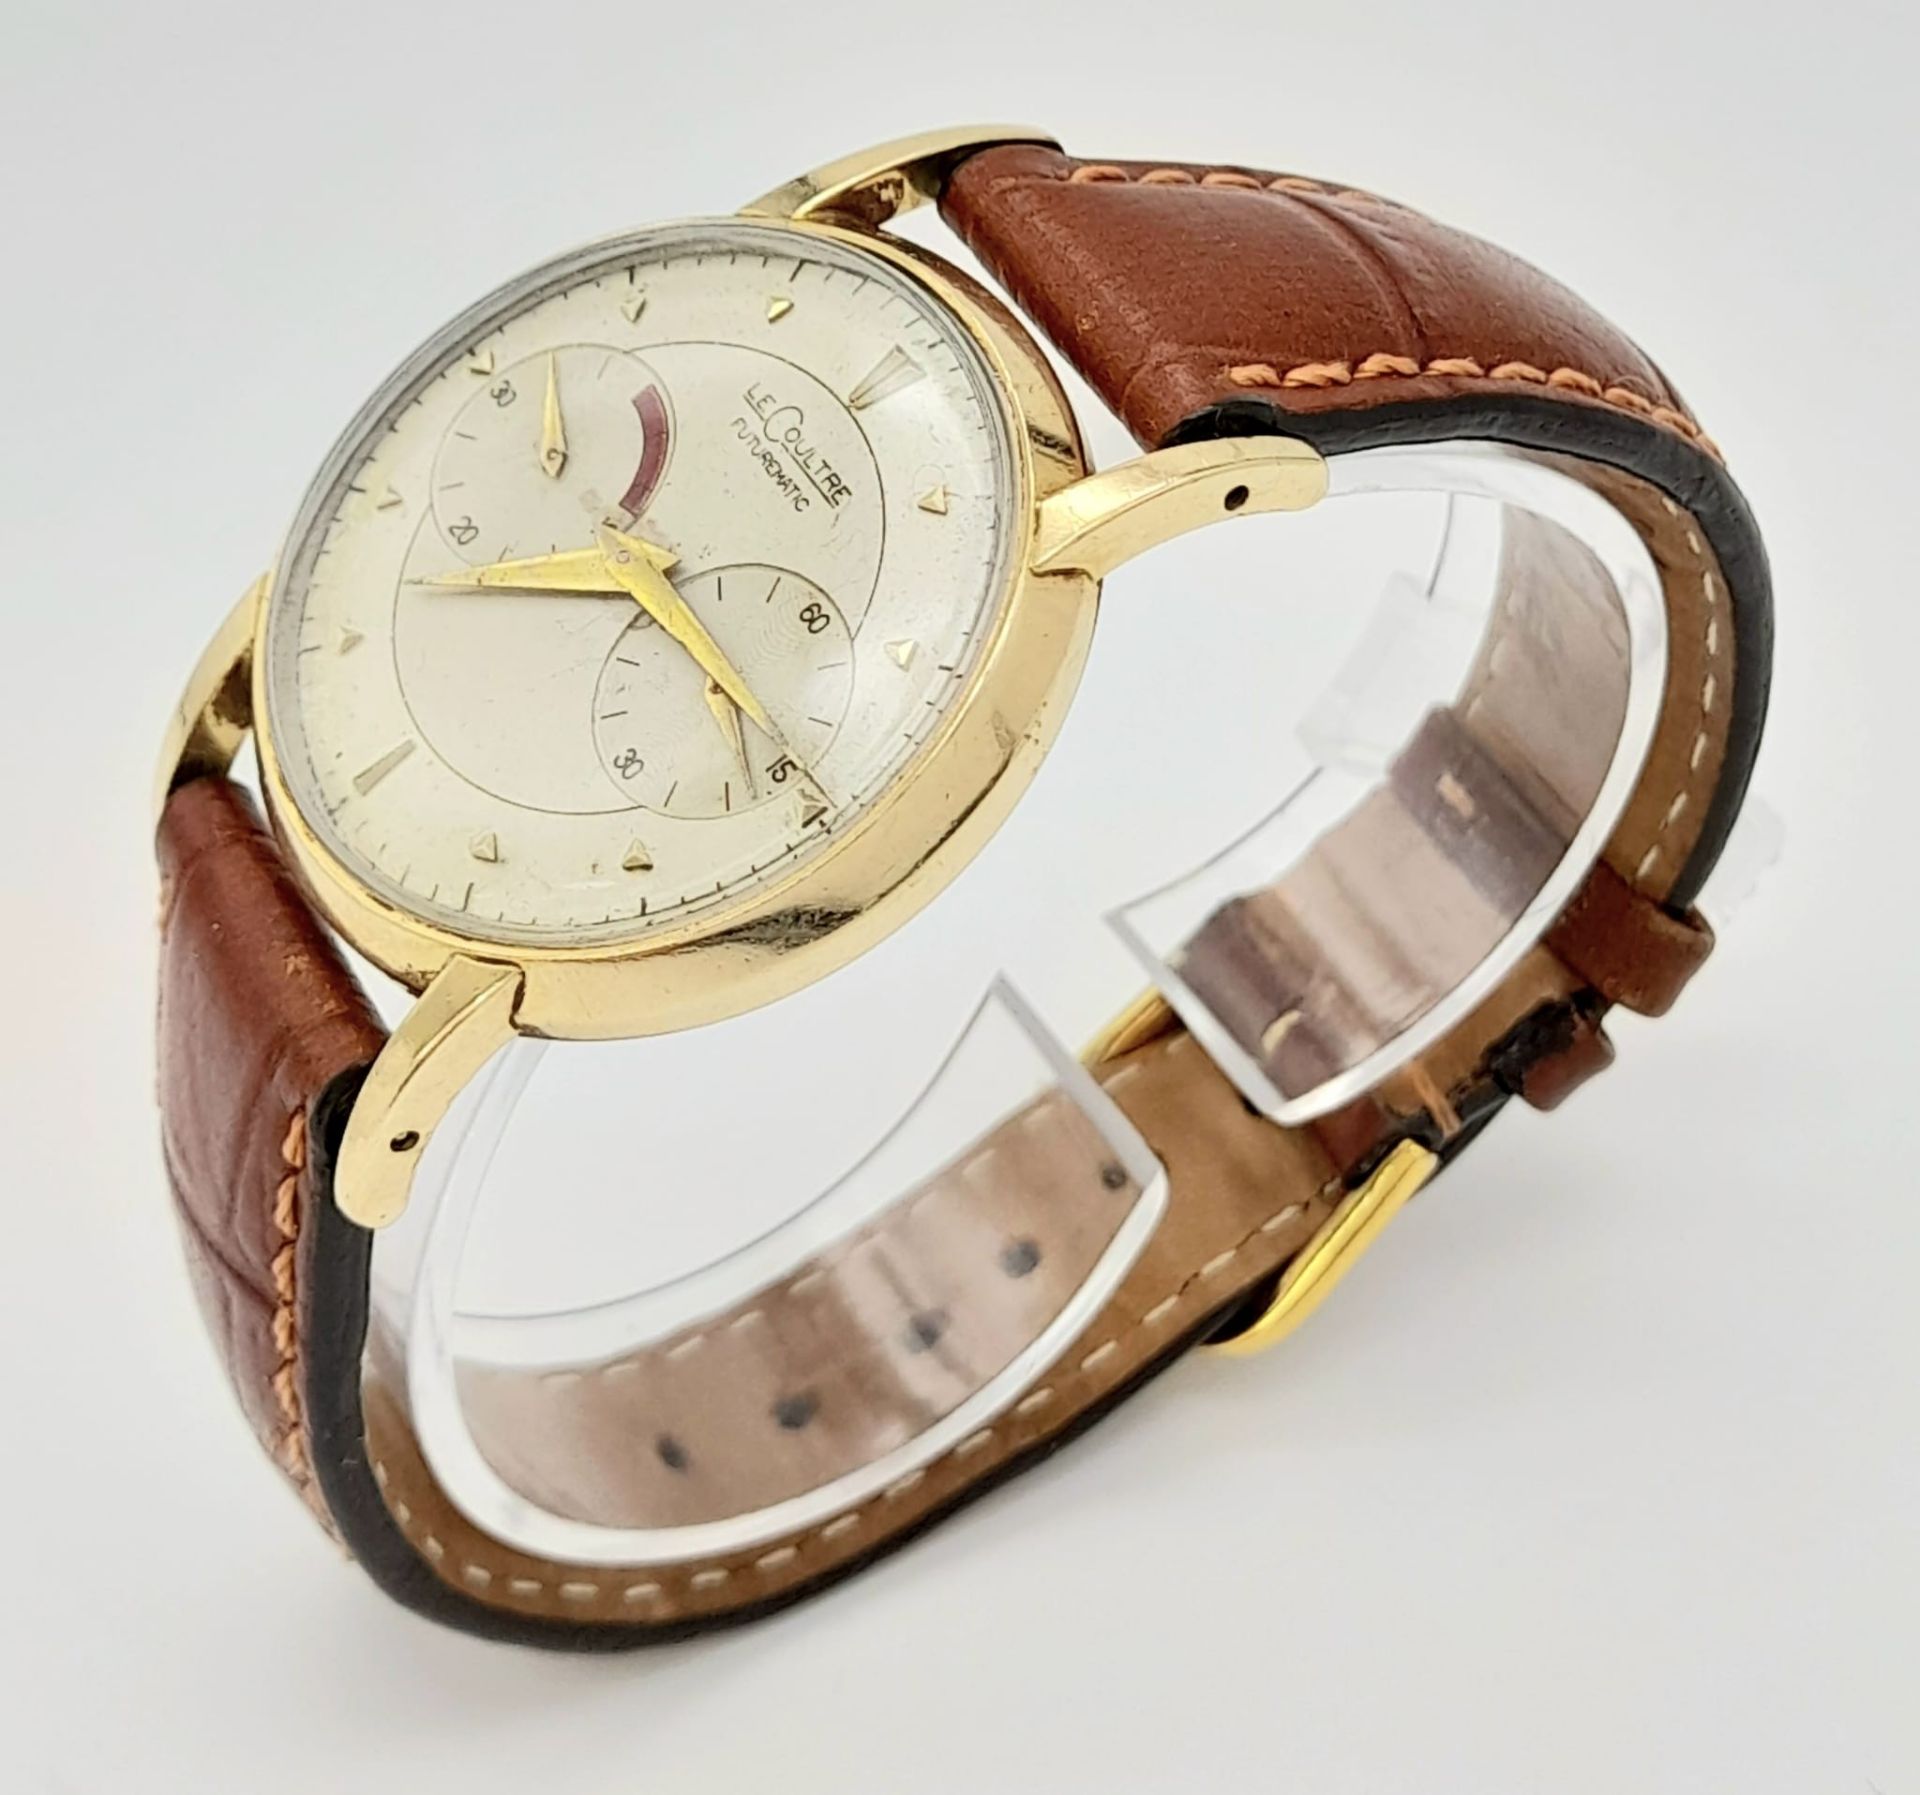 A Vintage Jaeger Le Coultre Futurematic Gents Watch.Brown leather strap. Case - 35mm. White dial - Image 6 of 7